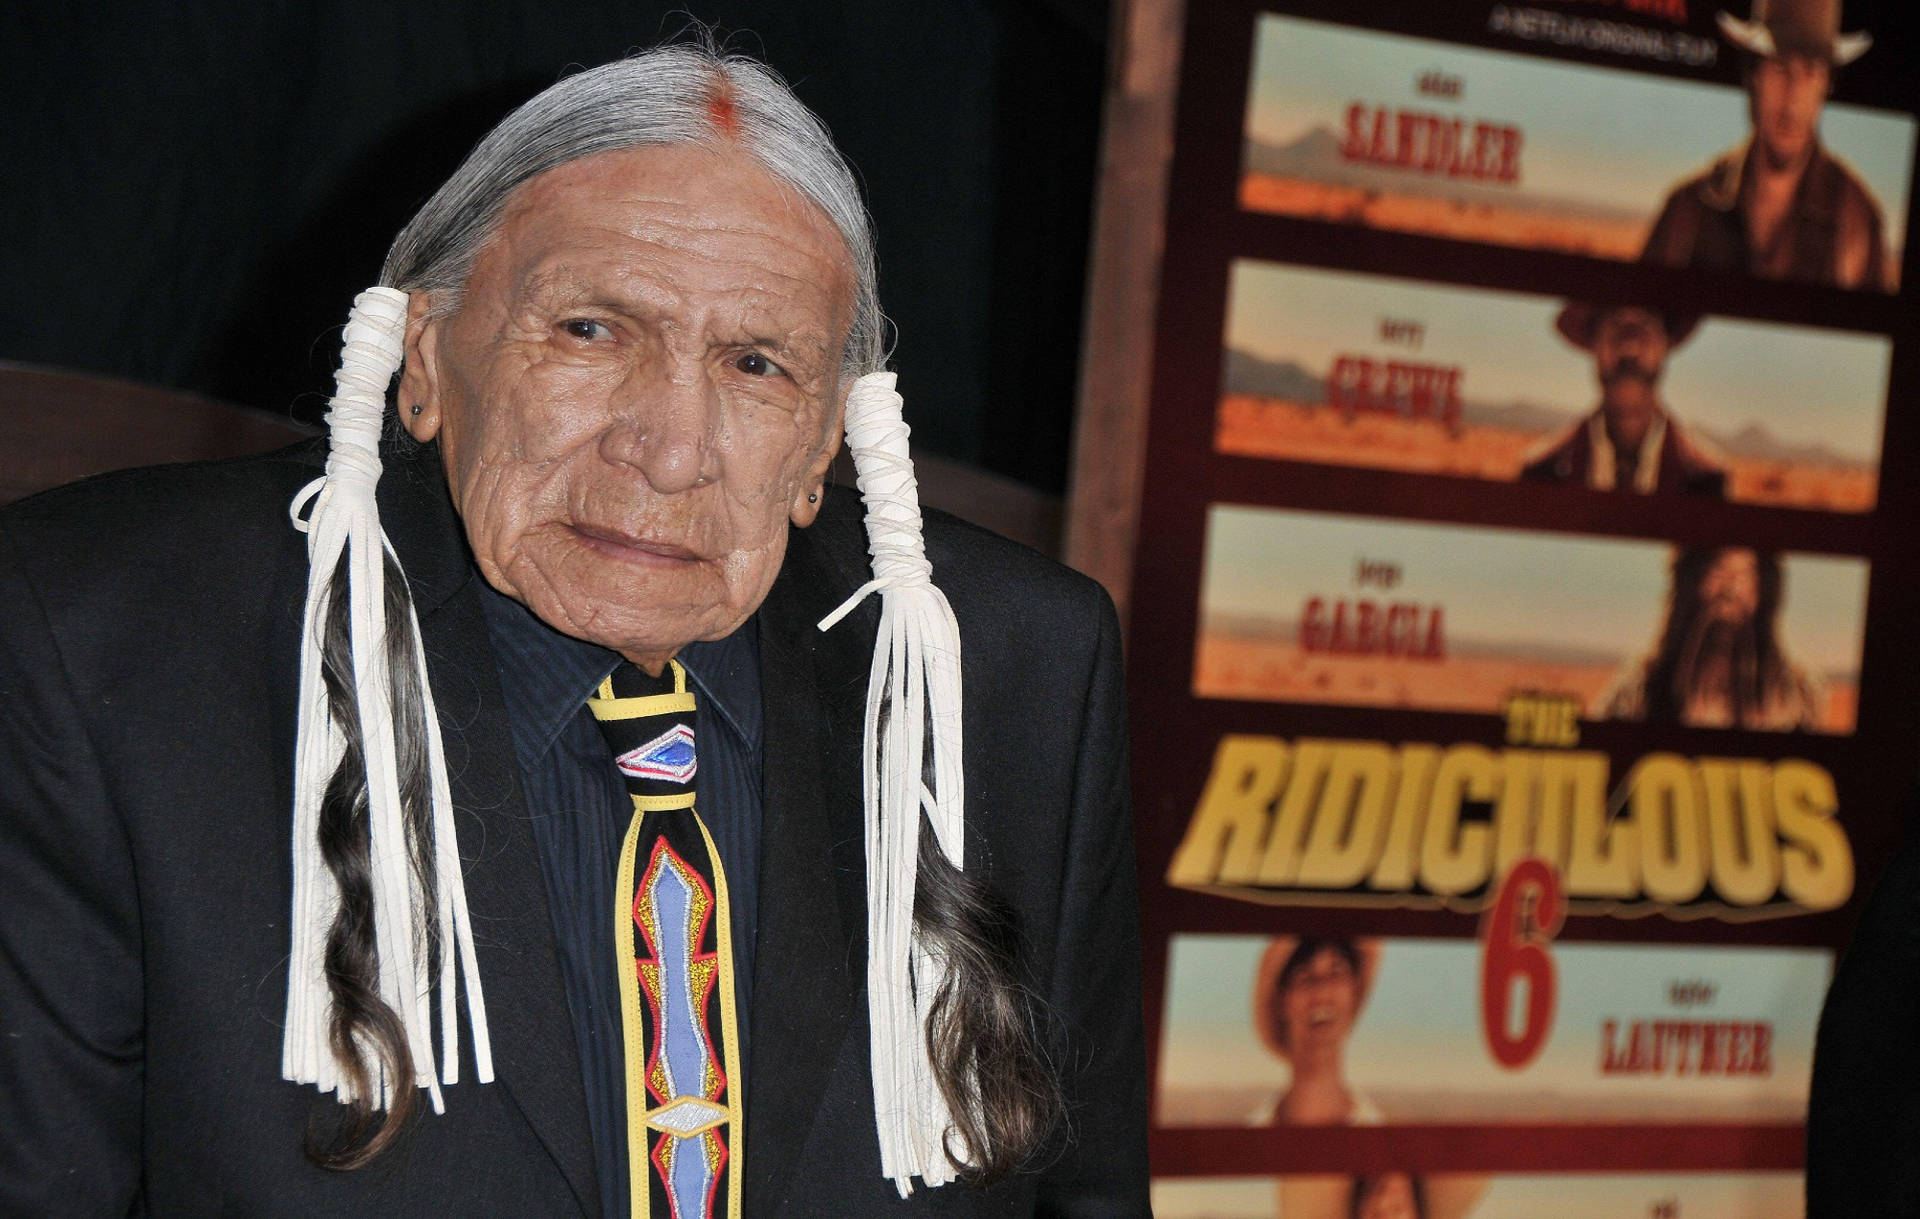 Actor Saginaw Grant At The Ridiculous 6 Premiere Wallpaper